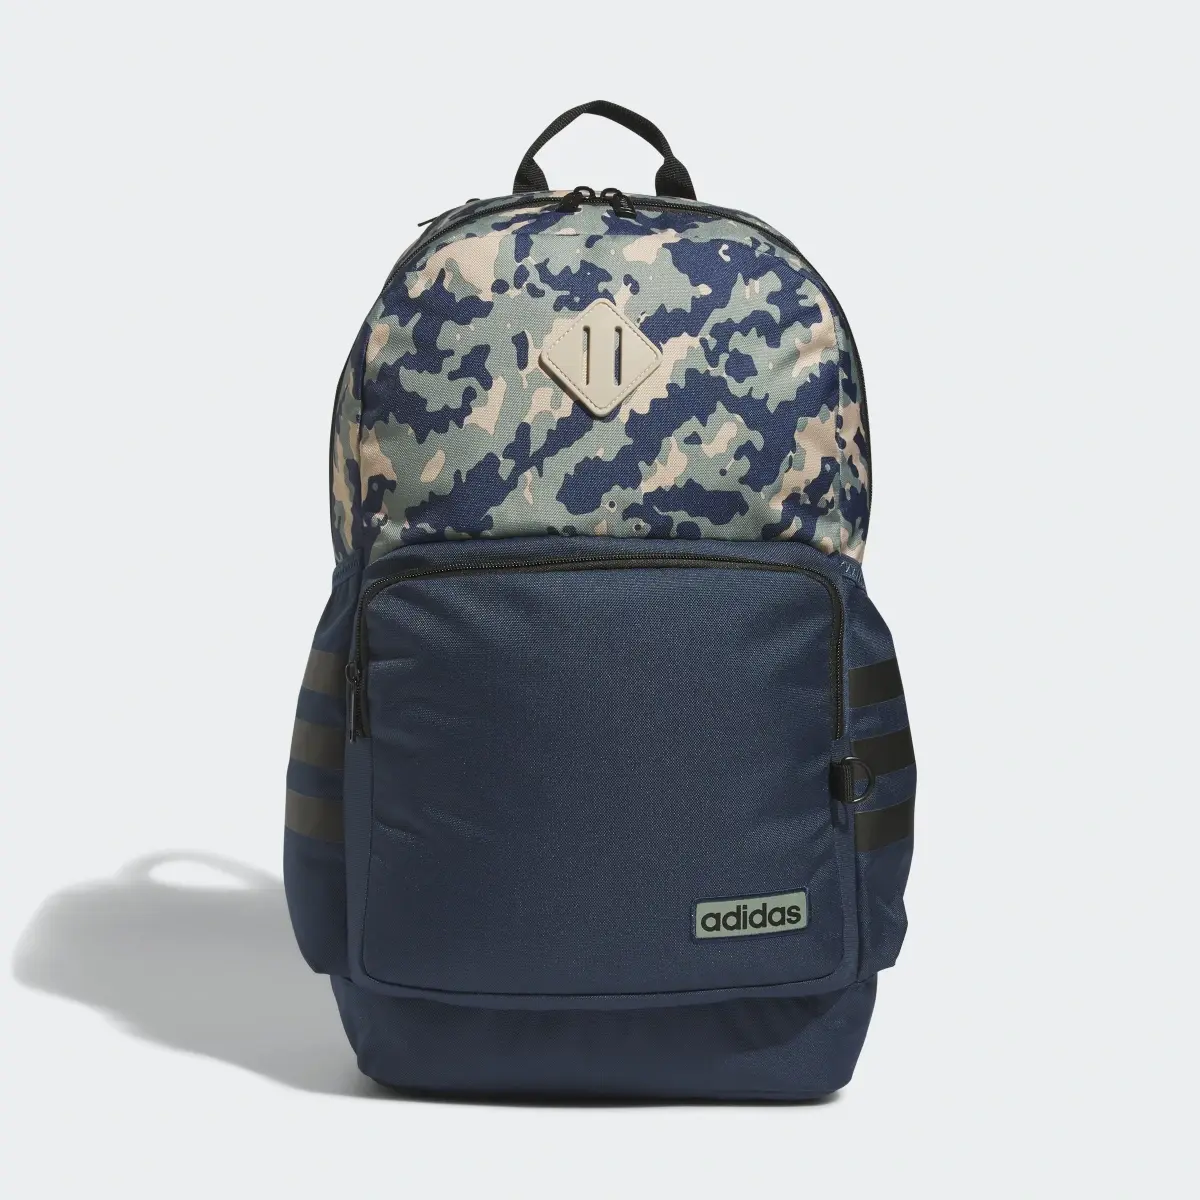 Adidas Classic 3-Stripes Backpack. 2